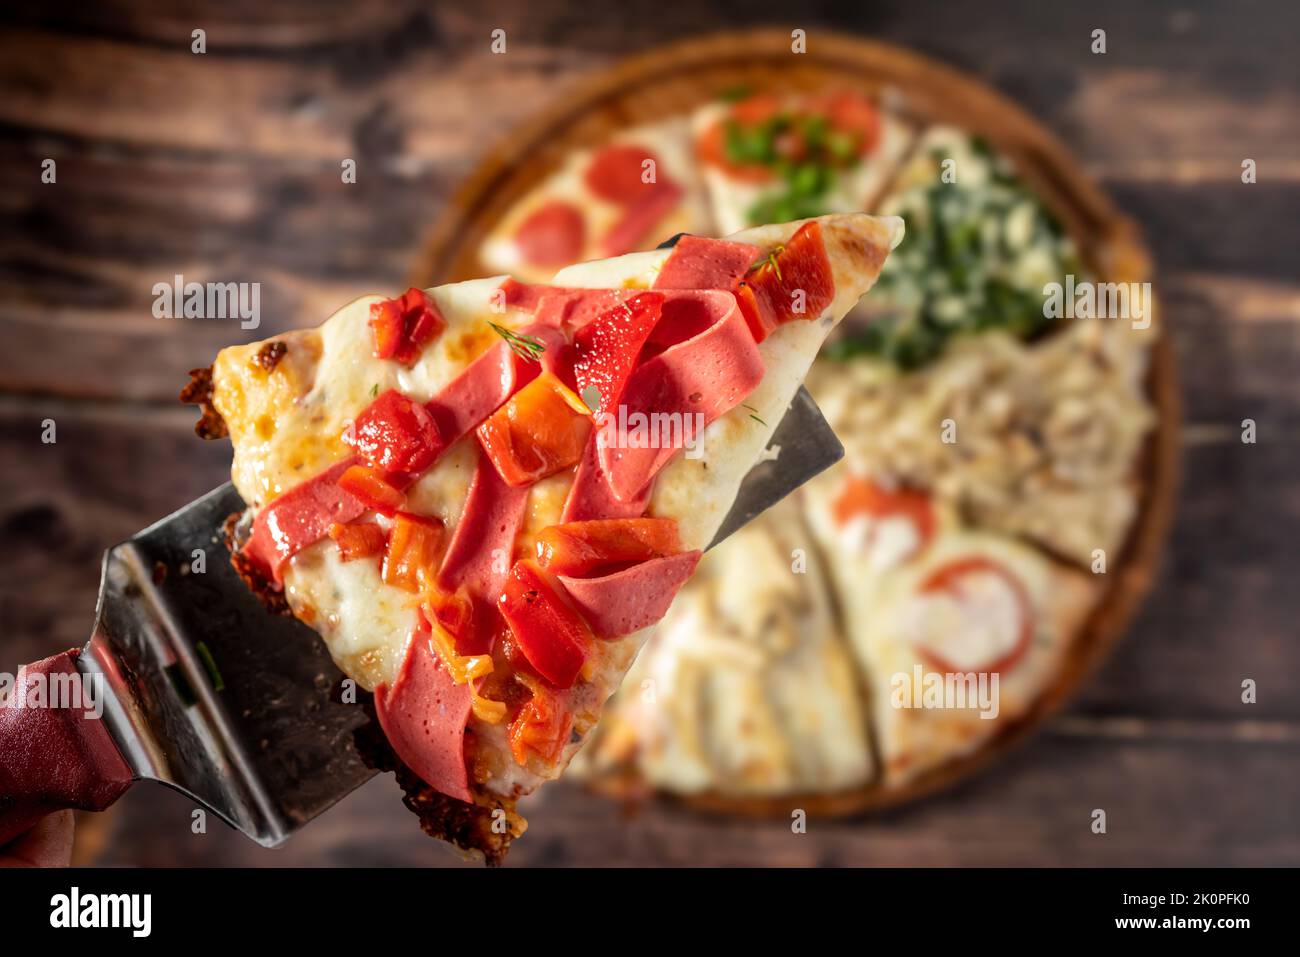 Assorted handmade Argentinian pizza on stone background Stock Photo